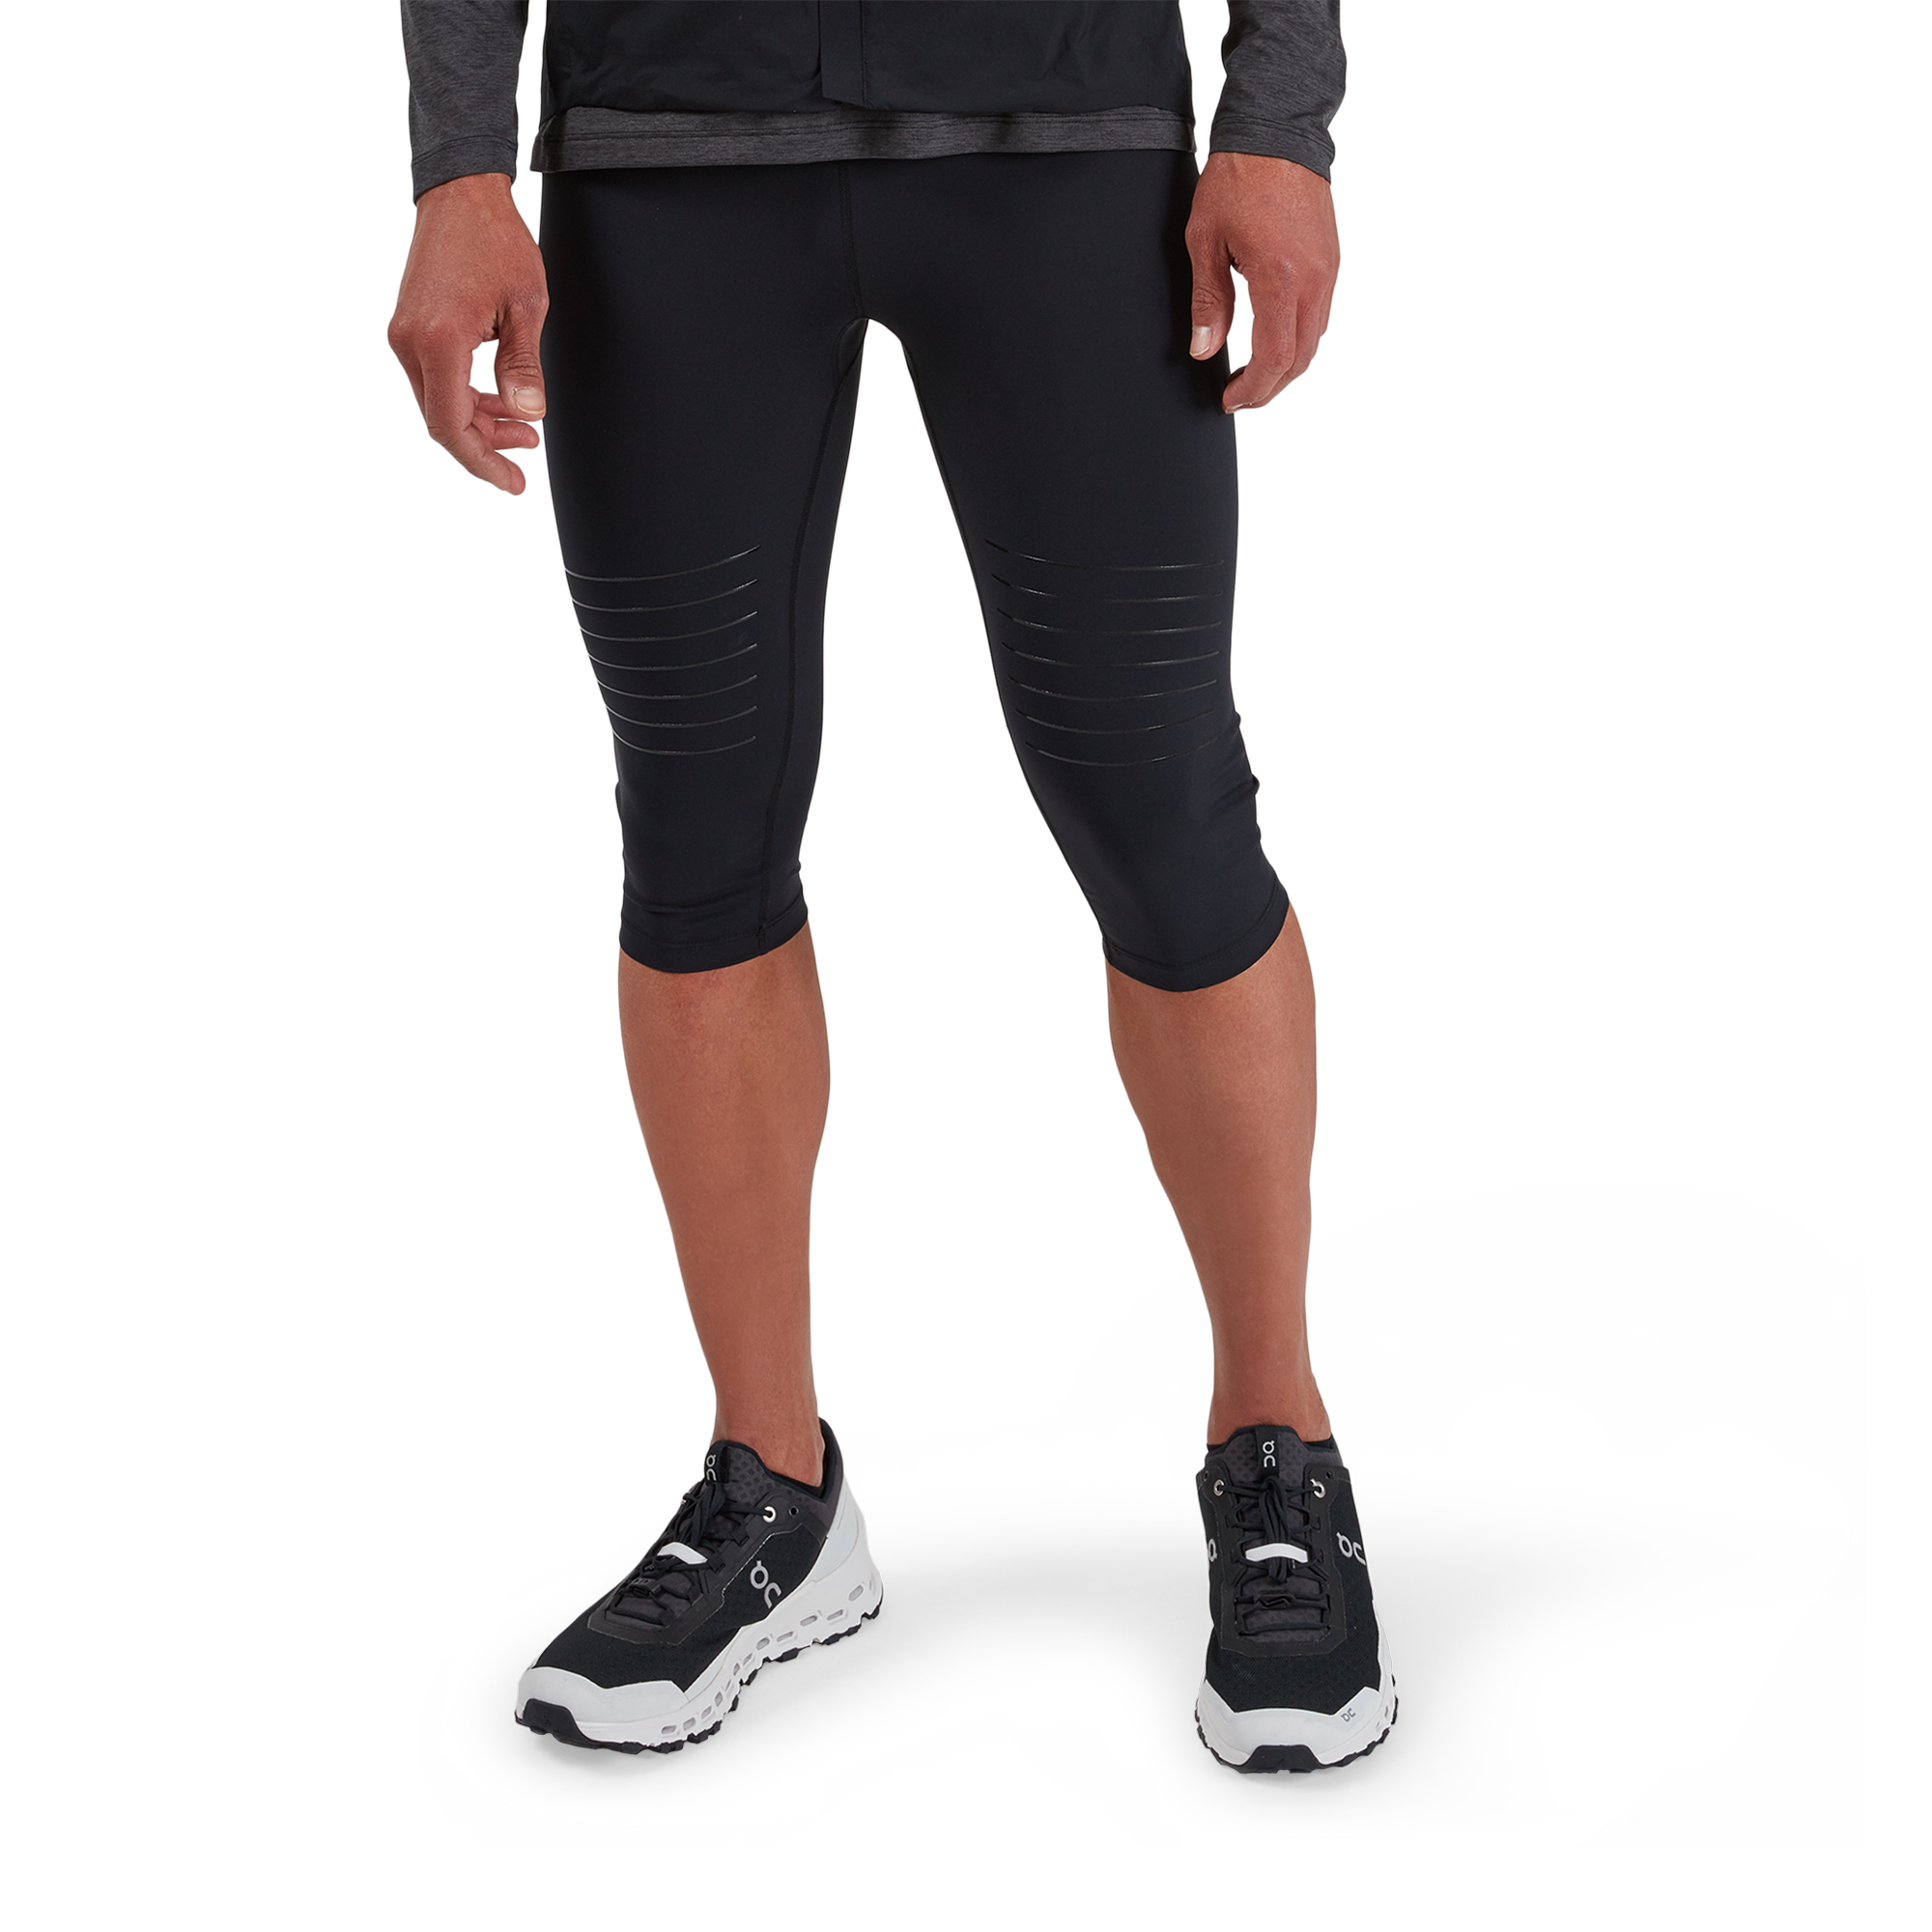 Wintertrail Mens Stretchy & Breathable Running Tights Black